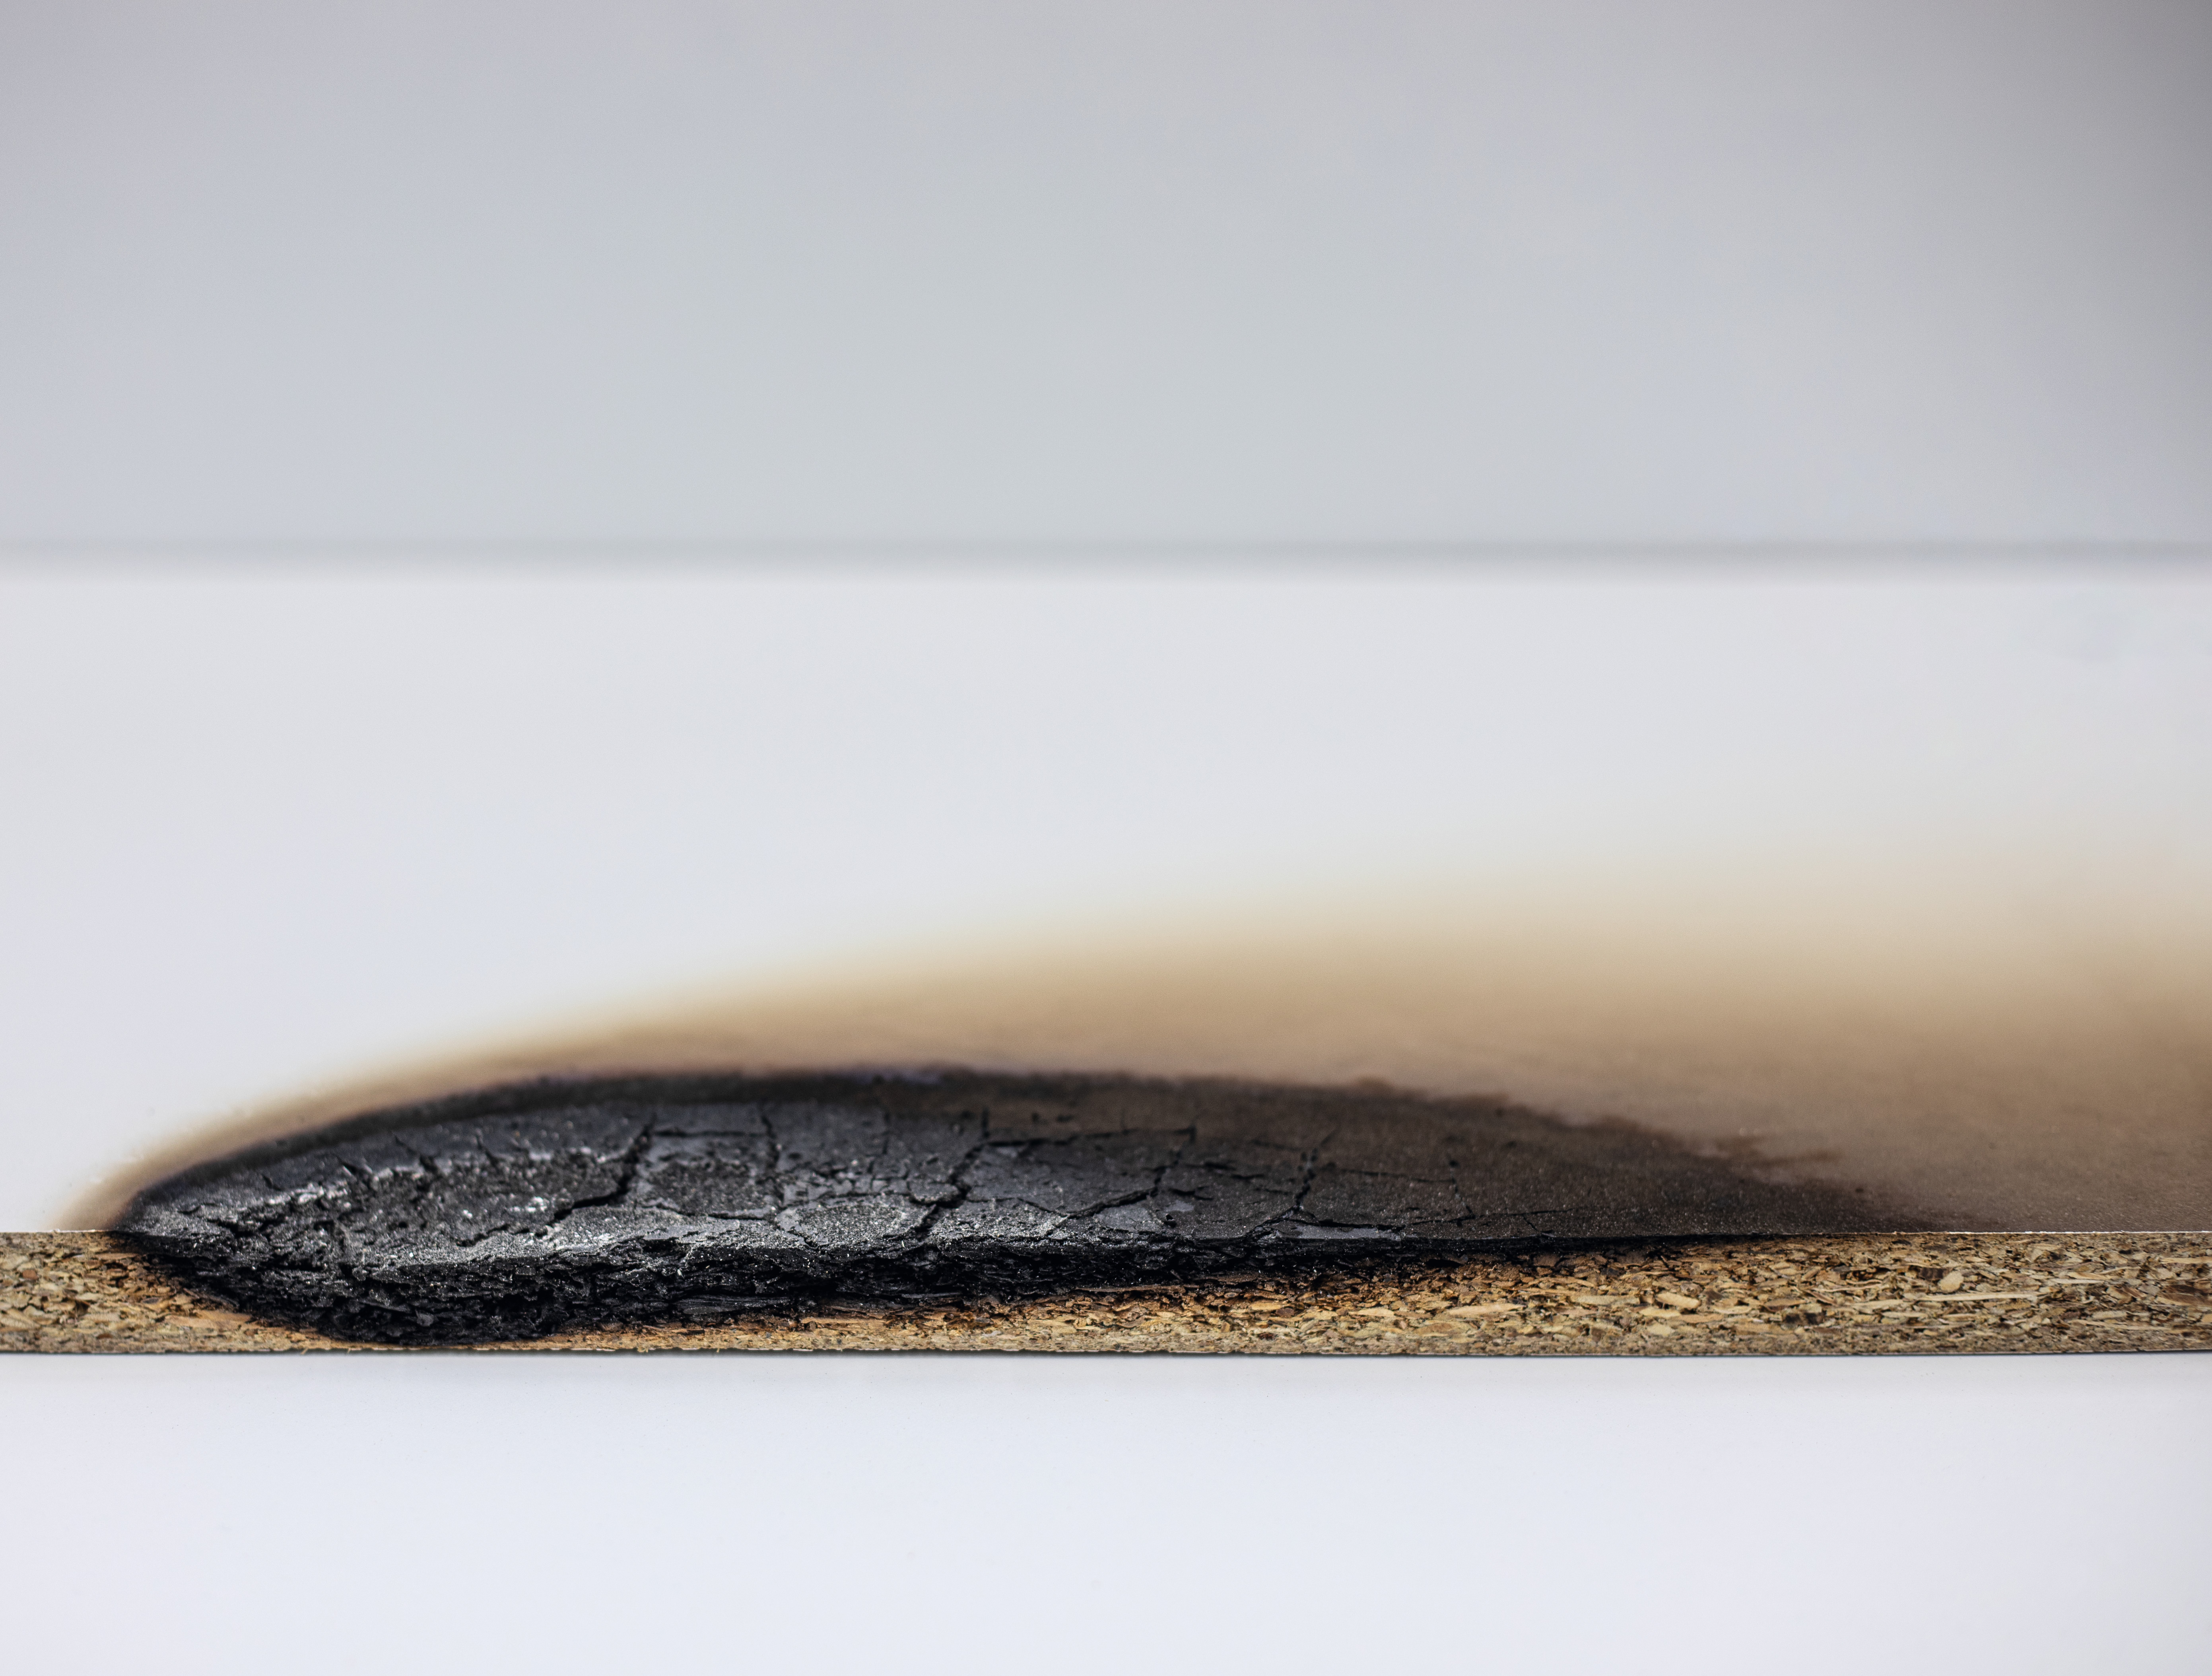 Product cross-section after 30 minutes of burning